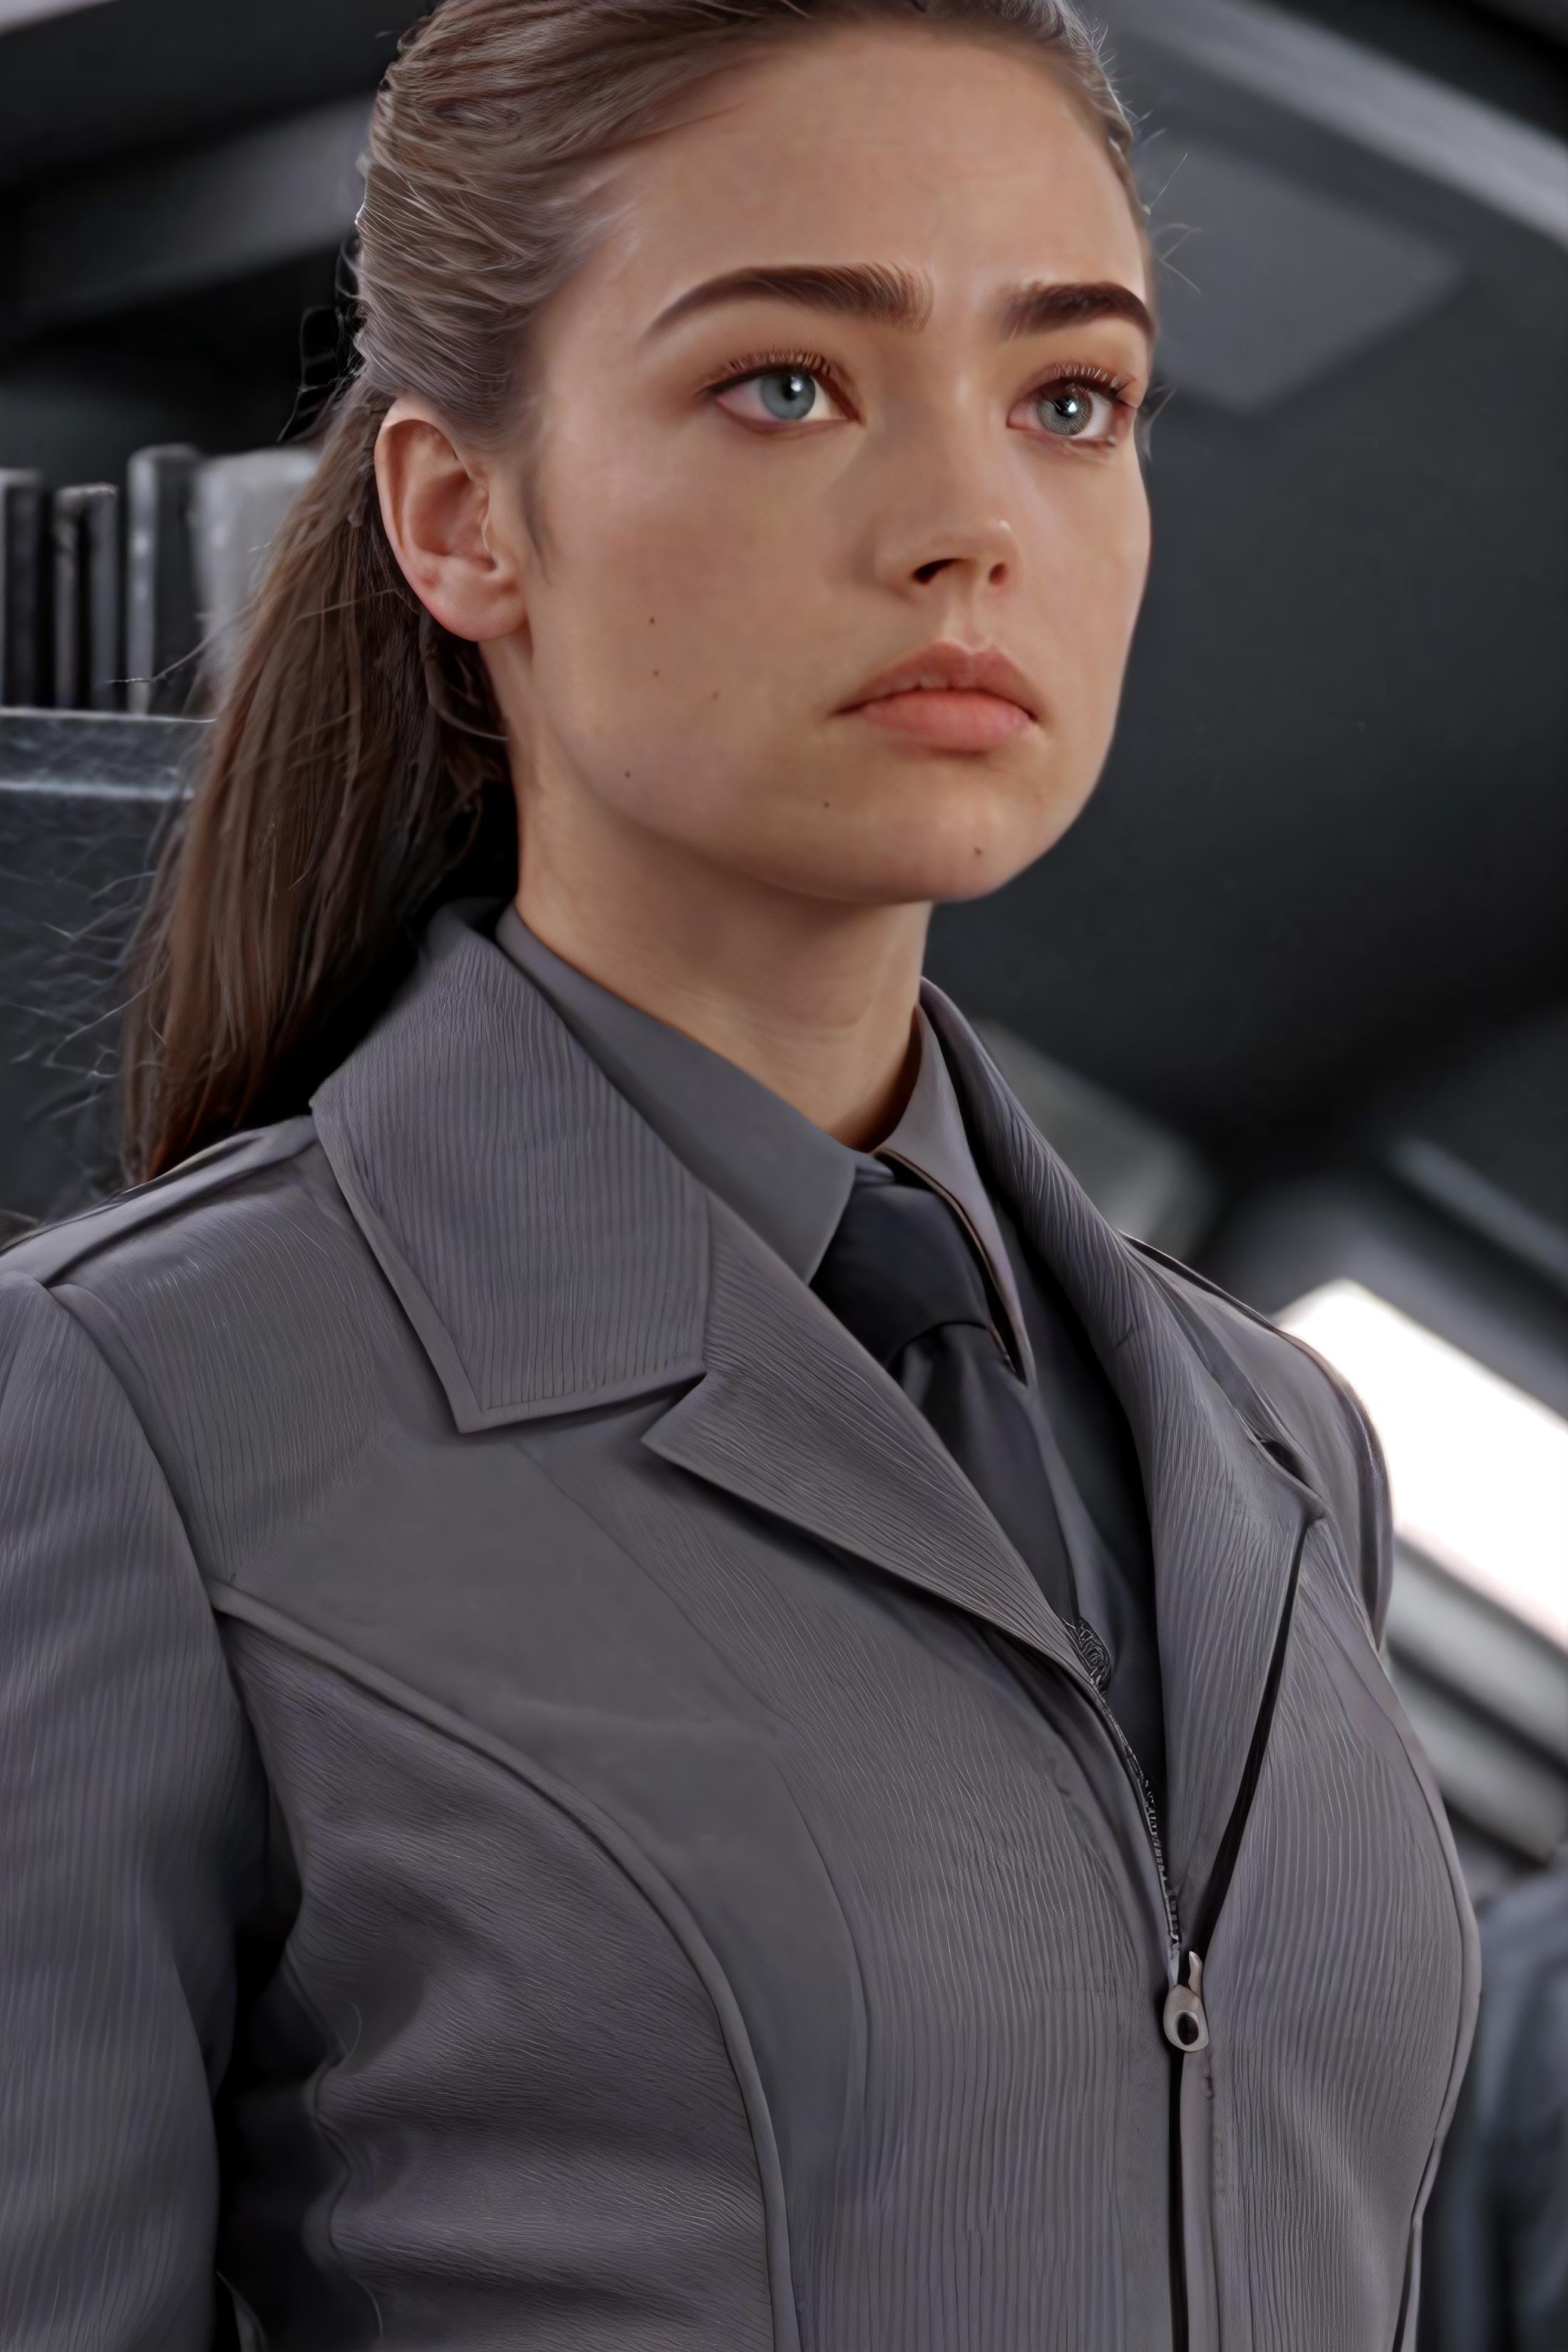 Denise Richards - Starship Troopers image by __2_